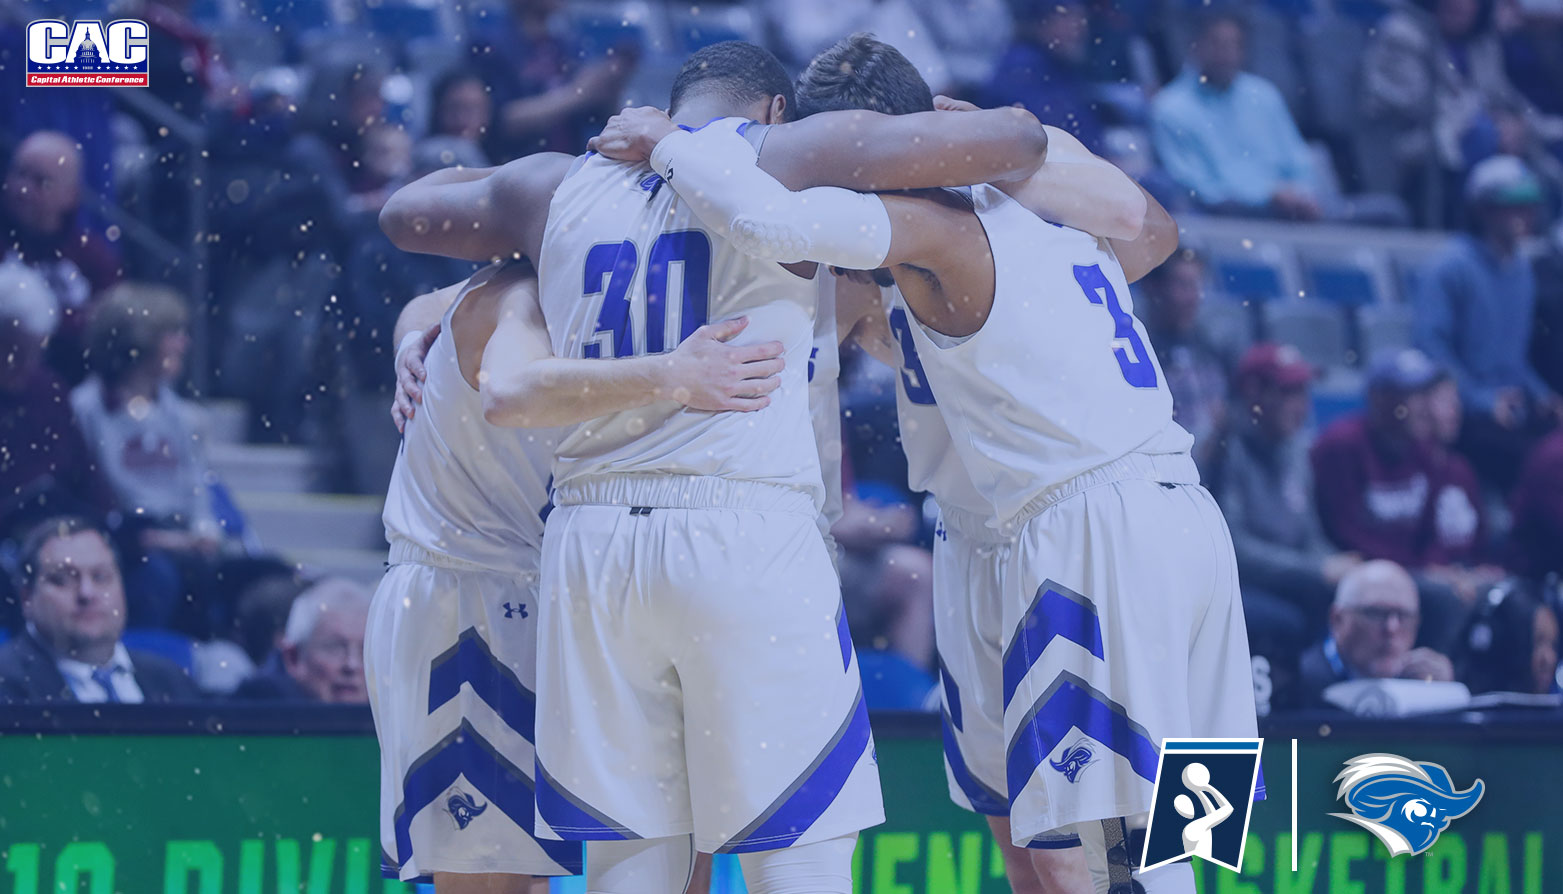 #9 Christopher Newport Falls to #6 Swarthmore in NCAA Men's Basketball National Semifinals